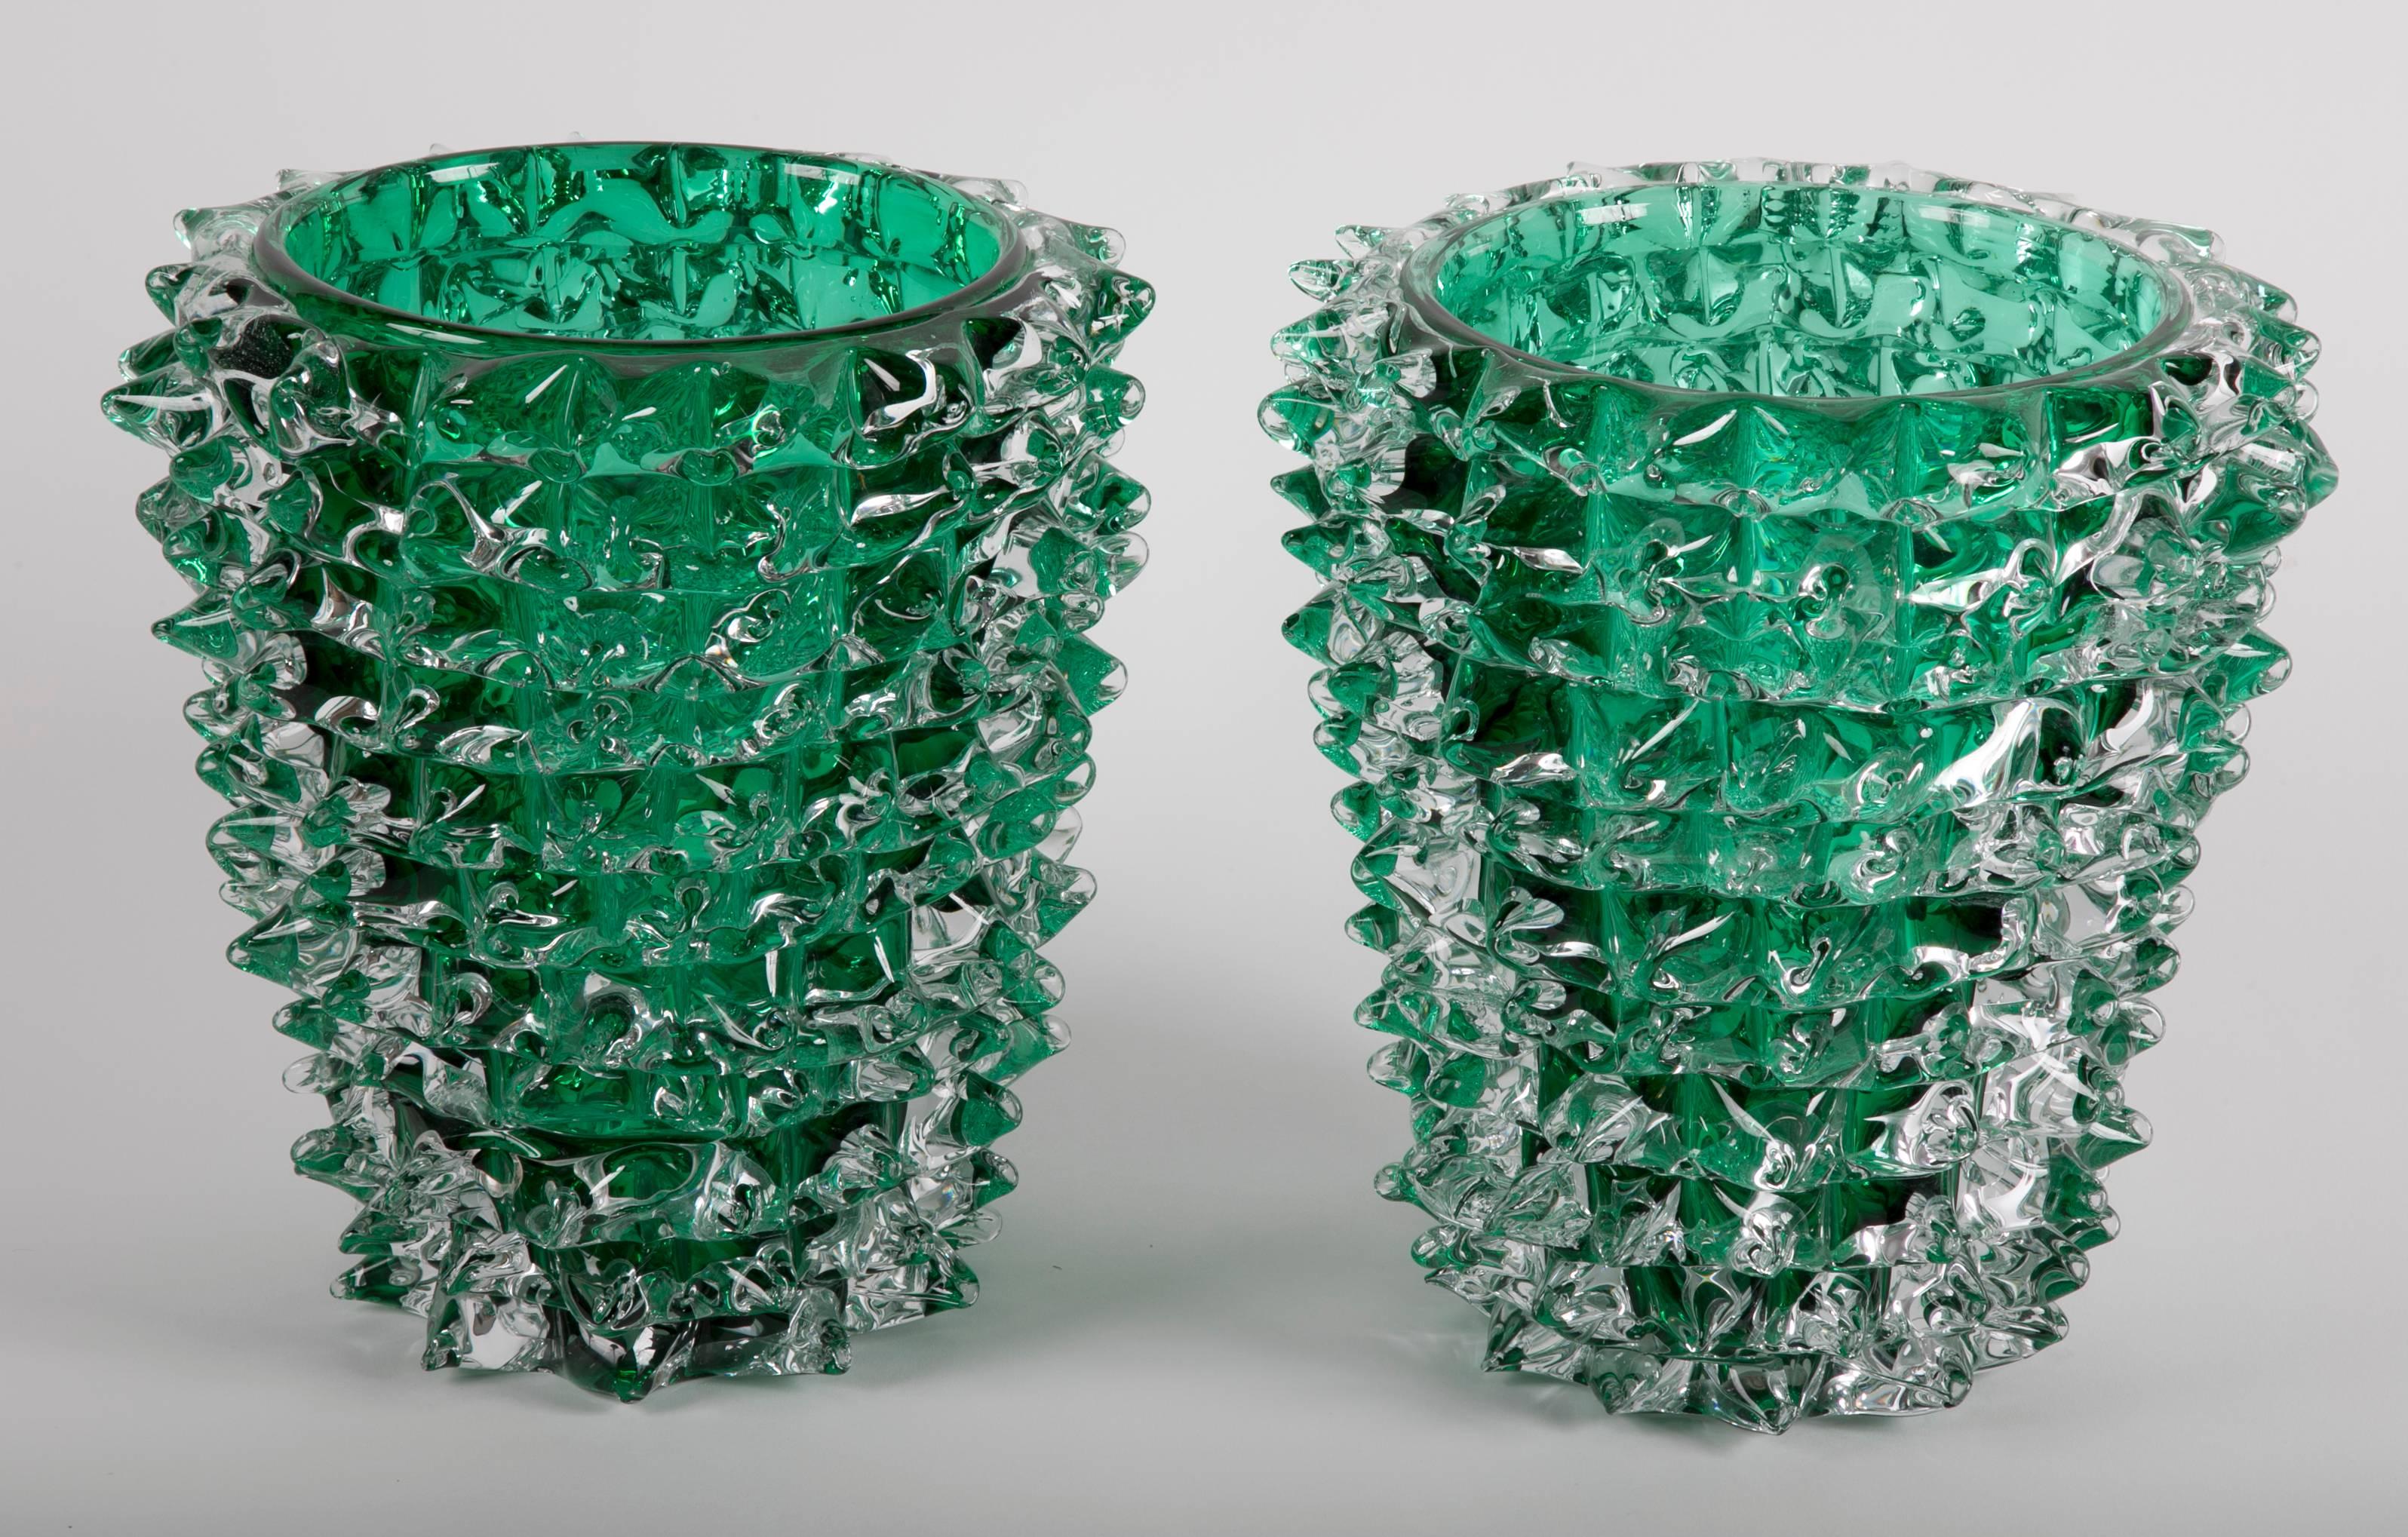 Pair of green iridescent glass vases signed Pino Signoretto produced on Murano.